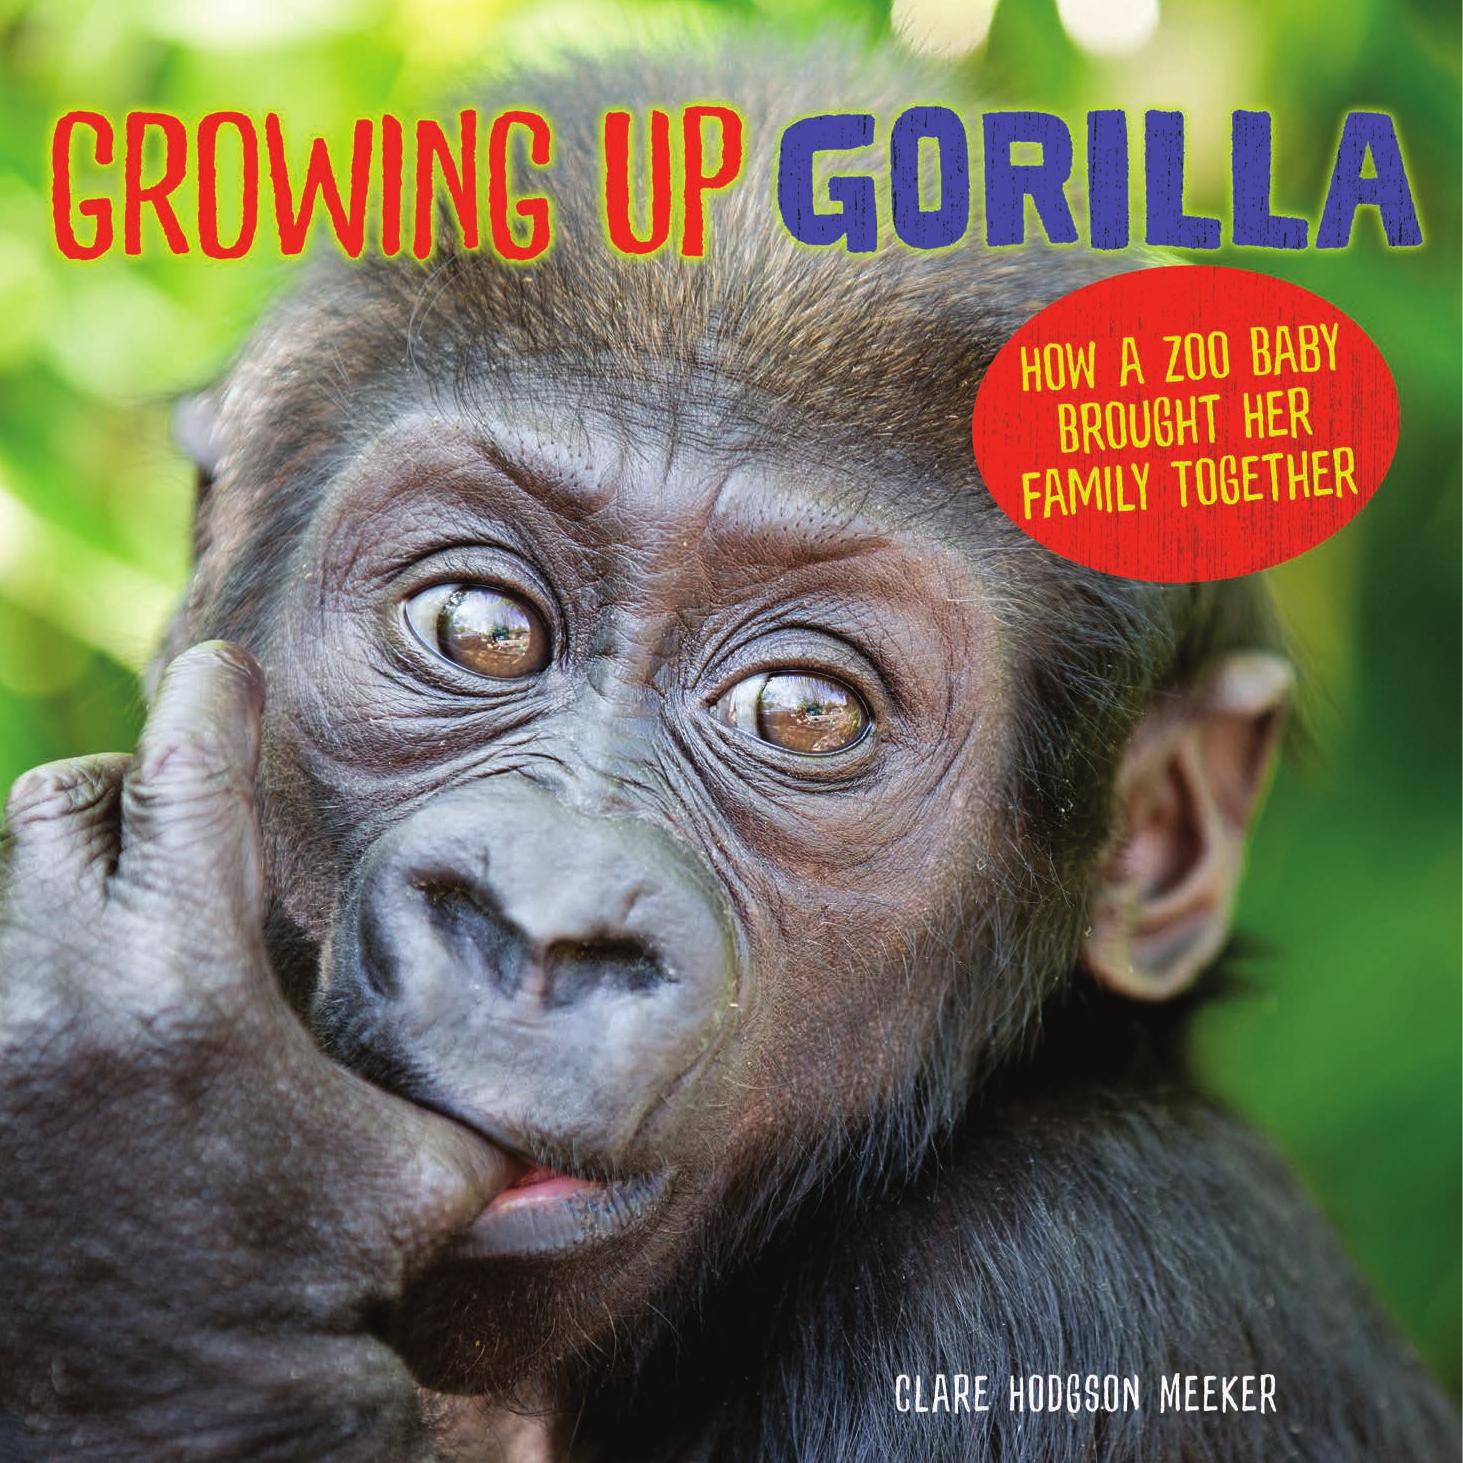 Growing up Gorilla : How a Zoo Baby Brought Her Family Together by Clare Hodgson Meeker